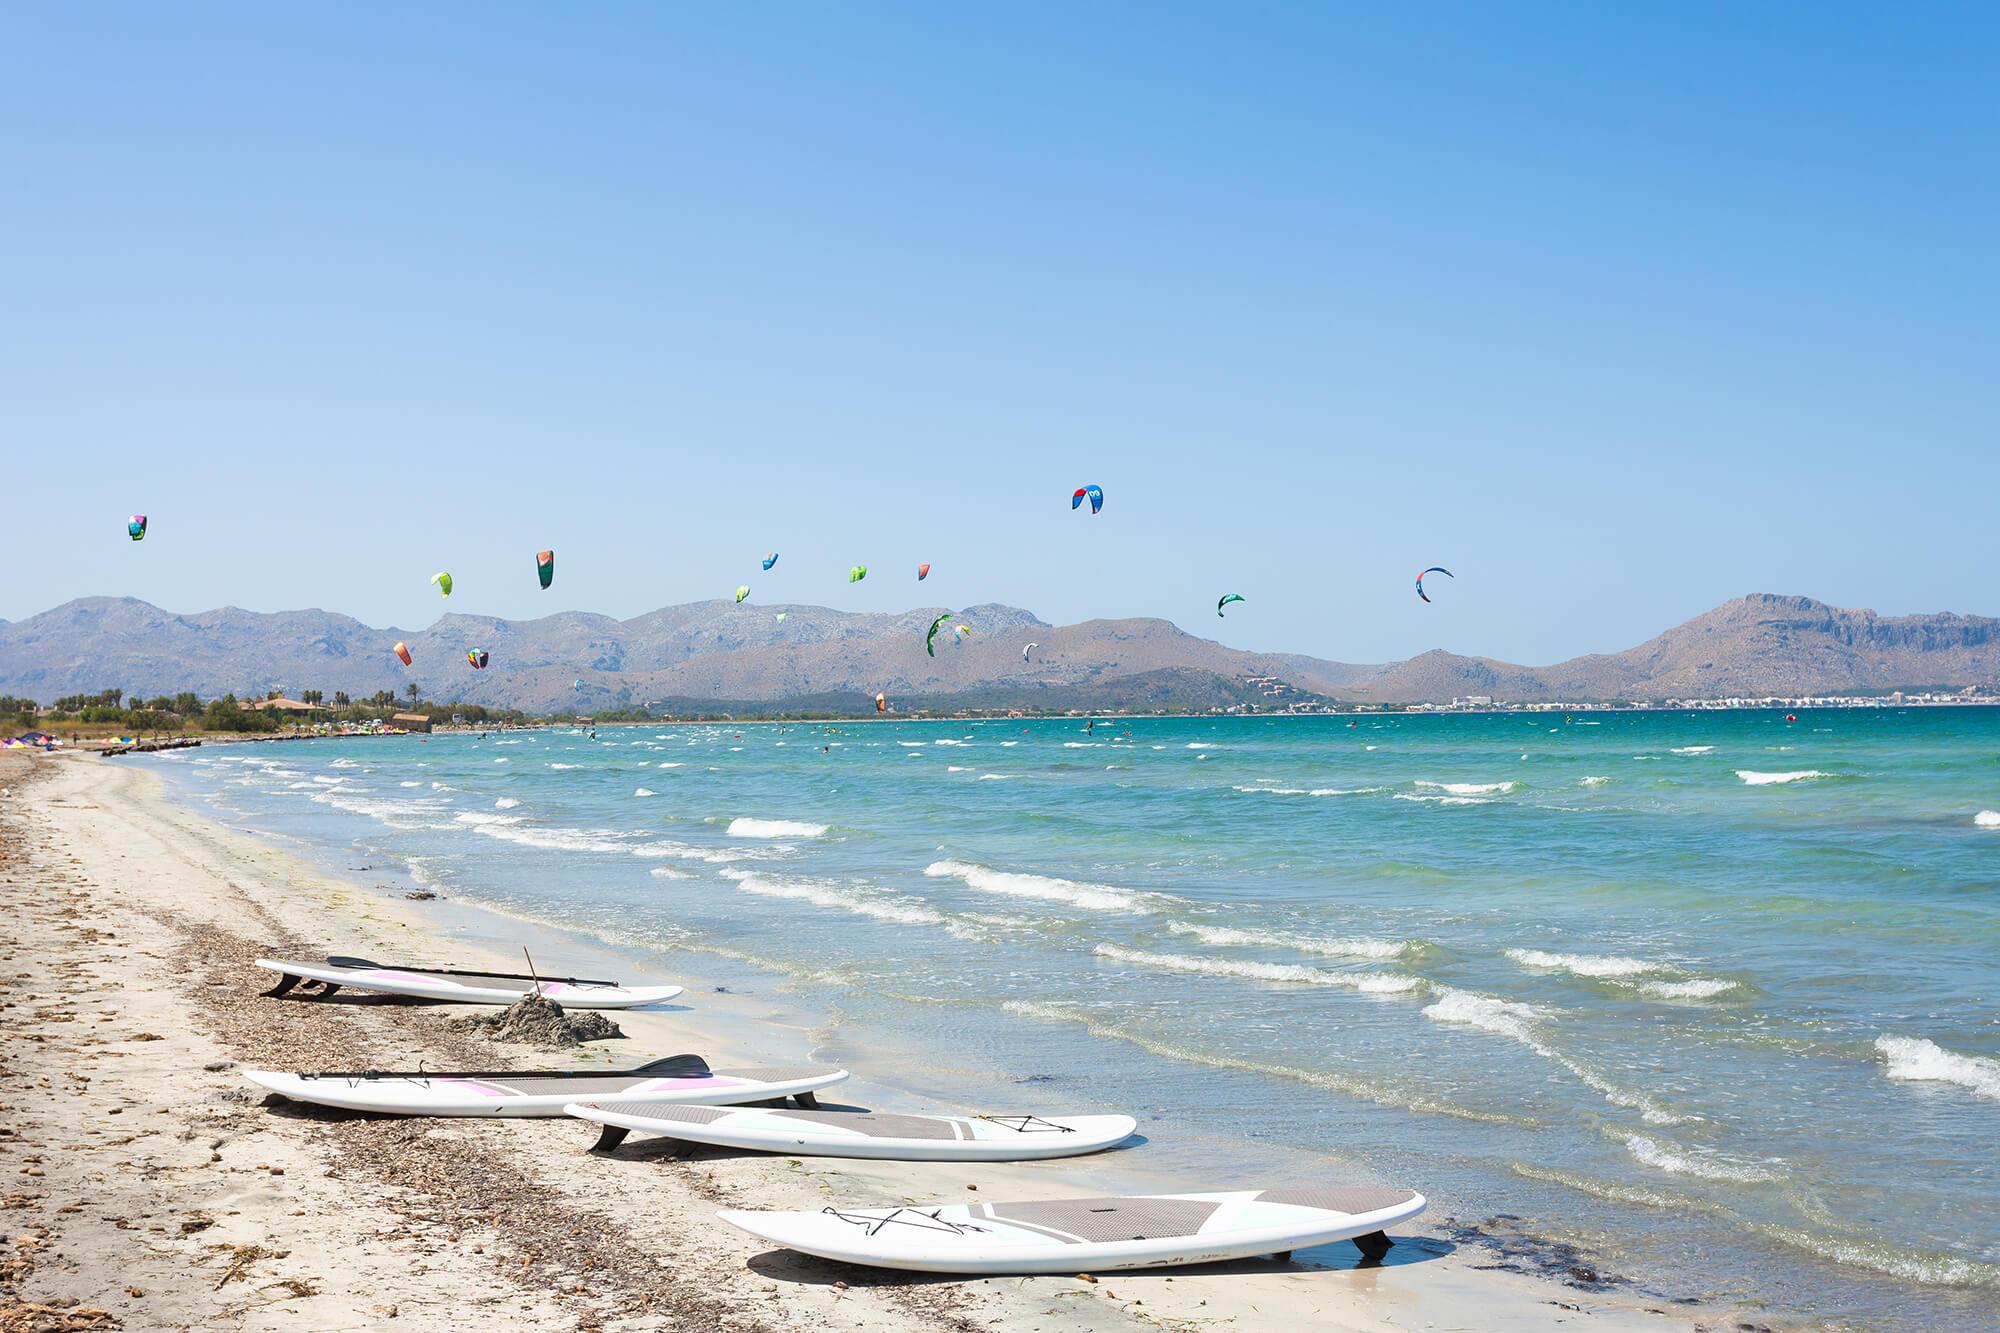 Alcudia beach is the ideal place for windsurfing